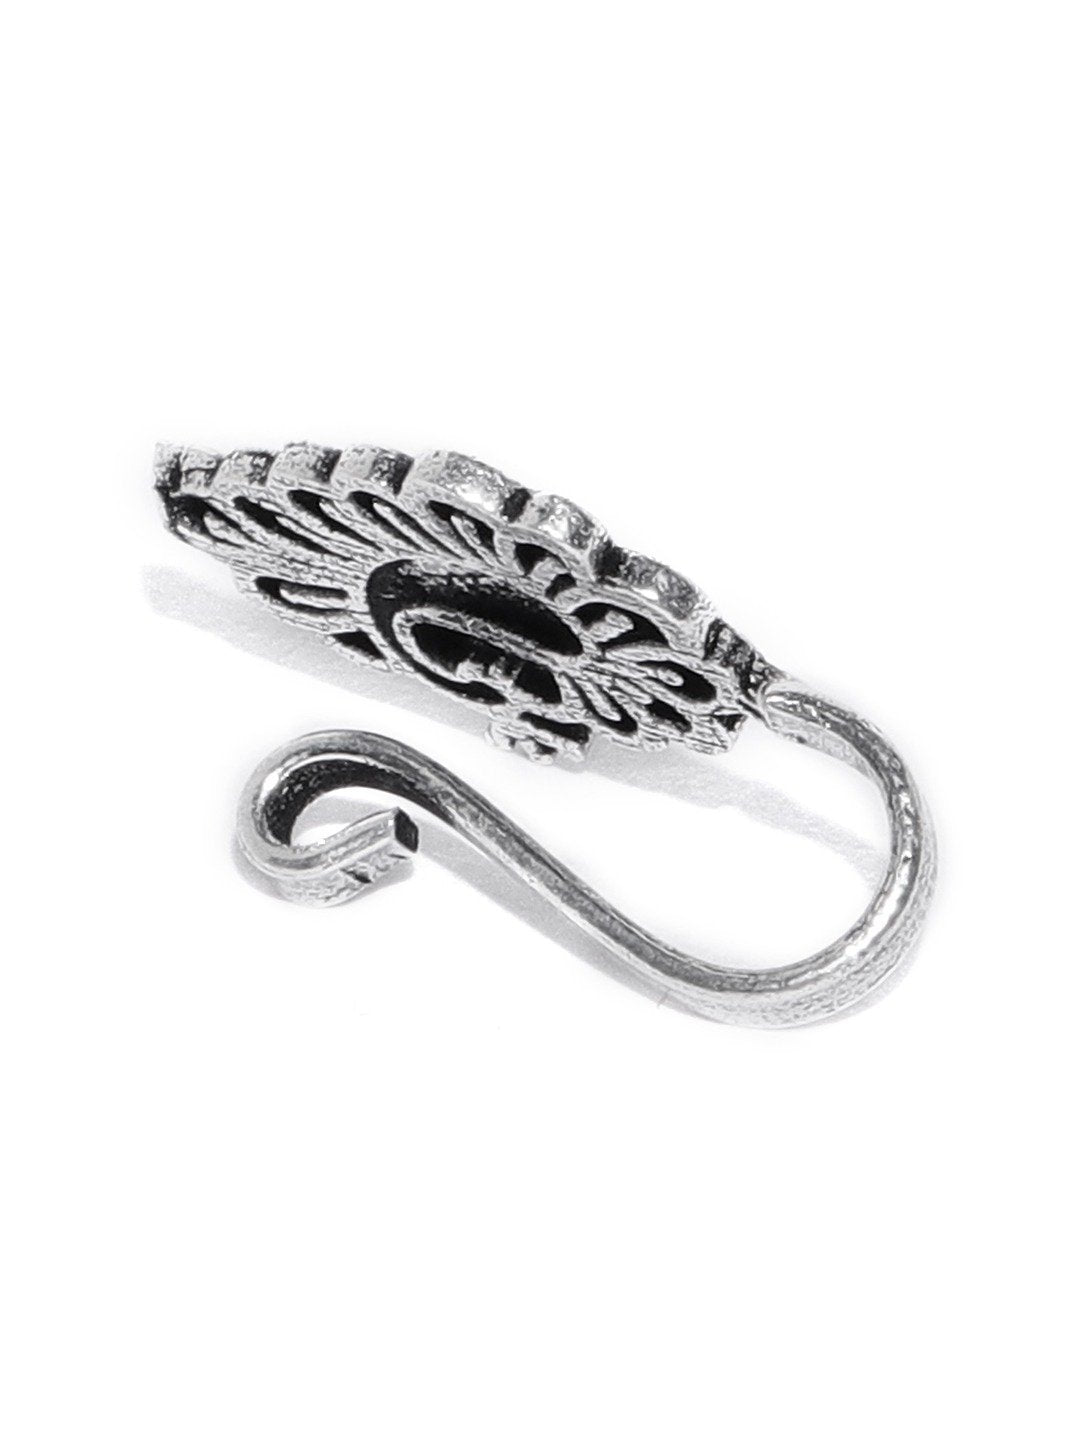 Antique Oxidised Silver-Toned Peacock Inspired Free Size Clip-On Nosepin